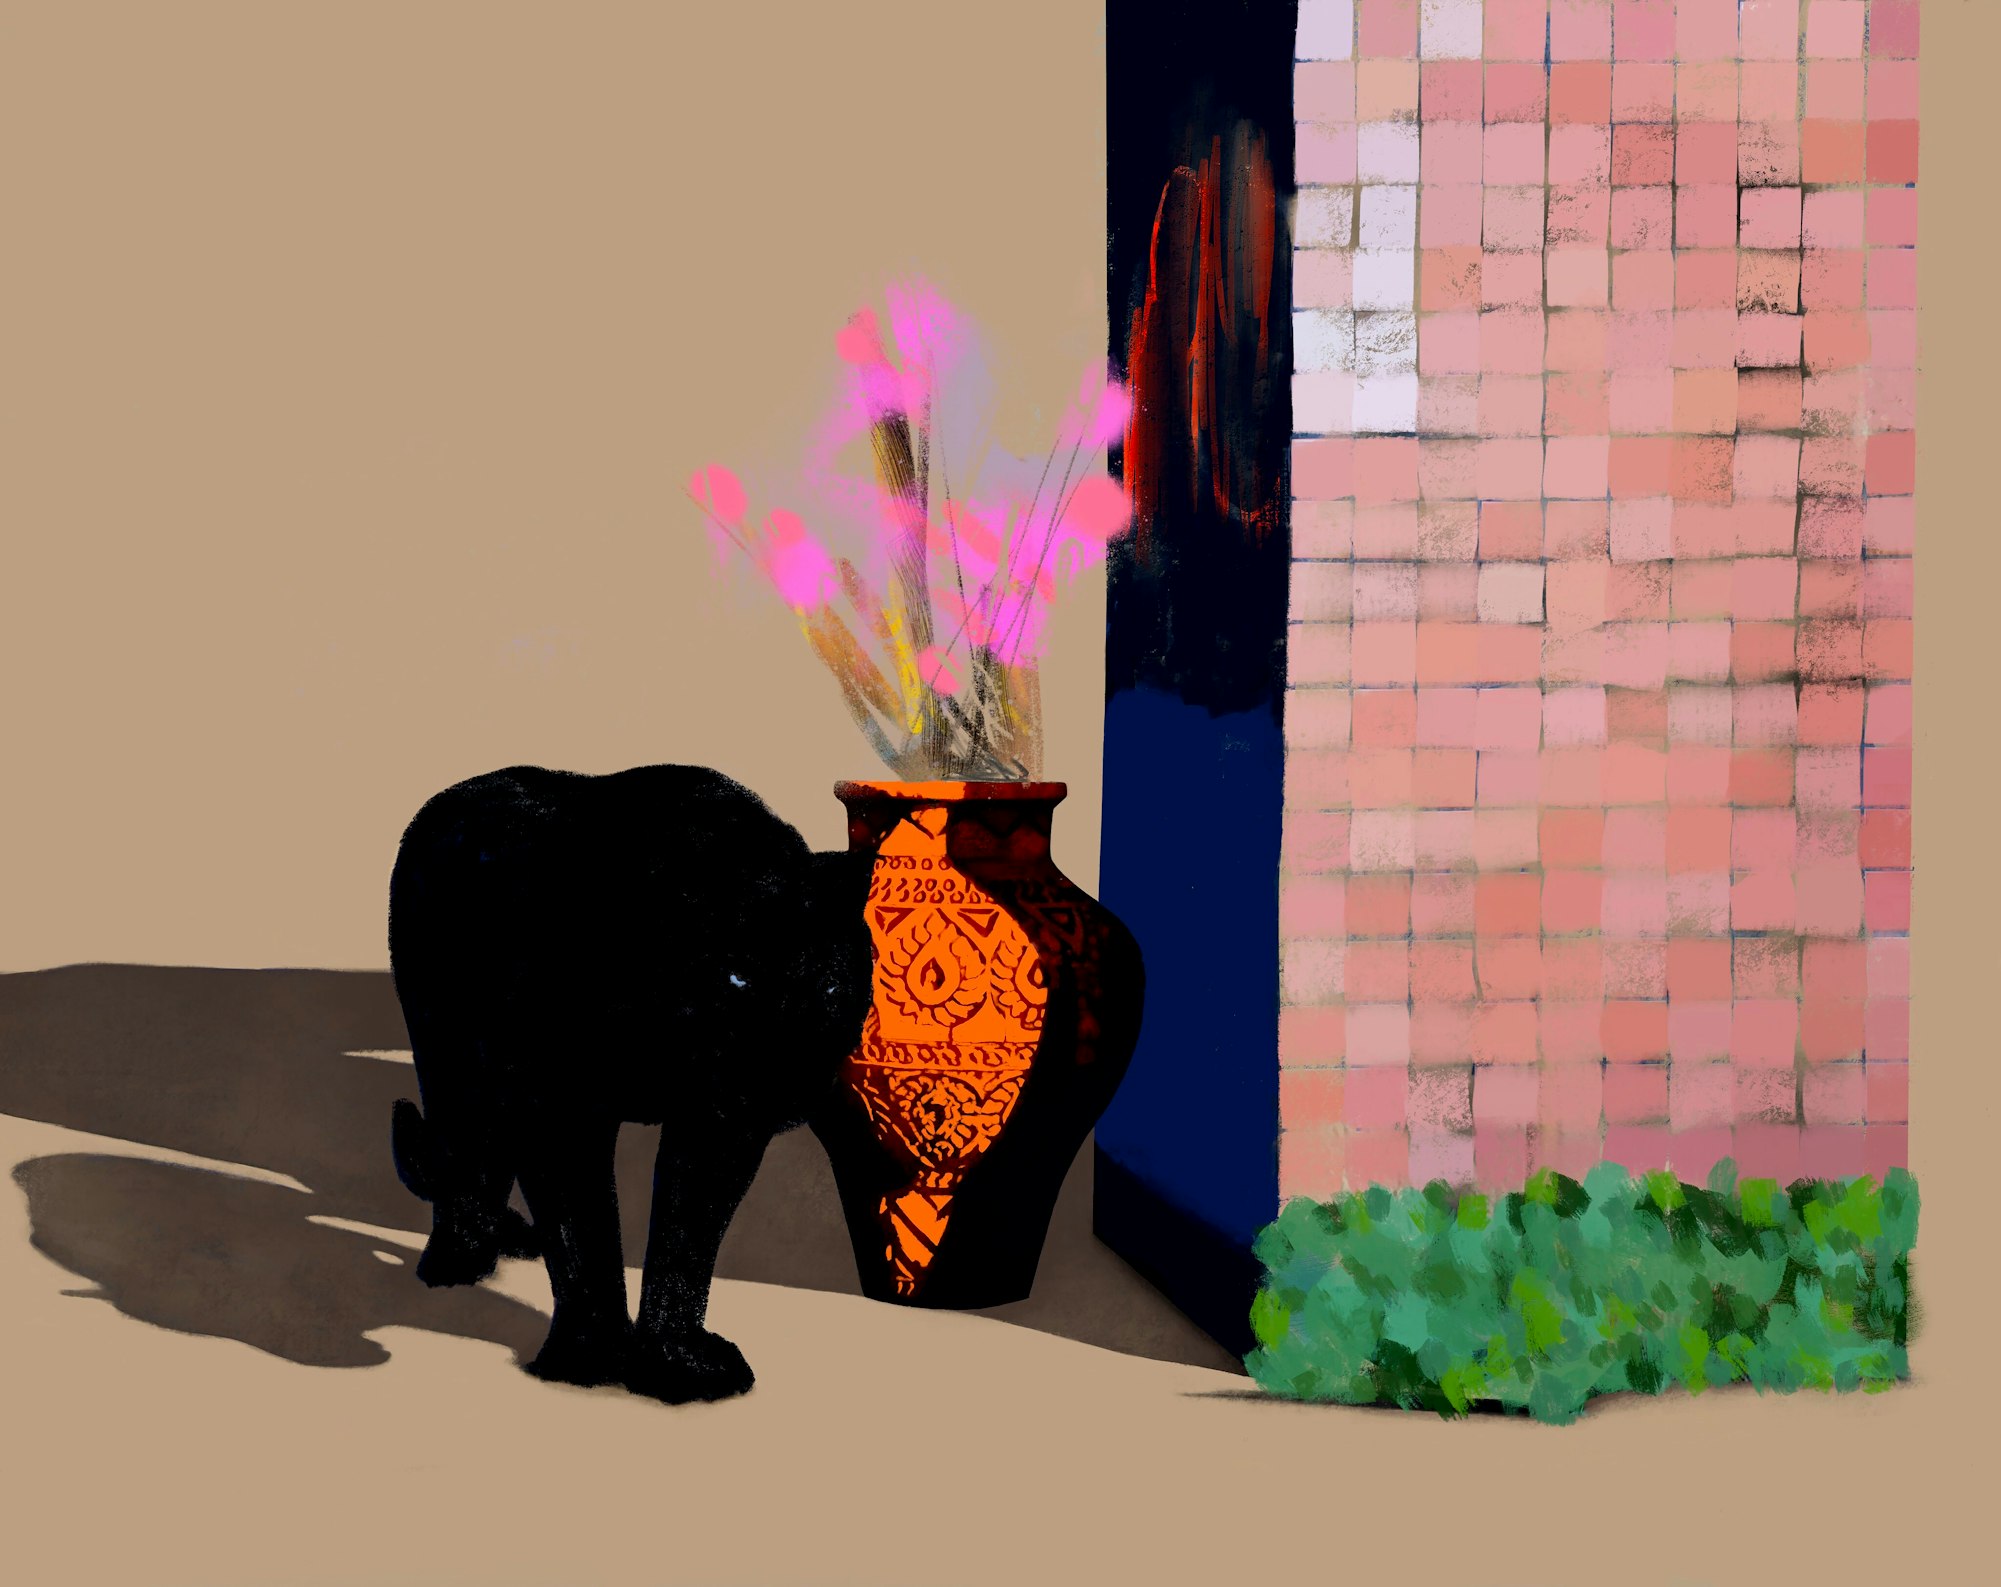 Black Panther of Orange Vase with Pink Flowers next to exposed brick wall